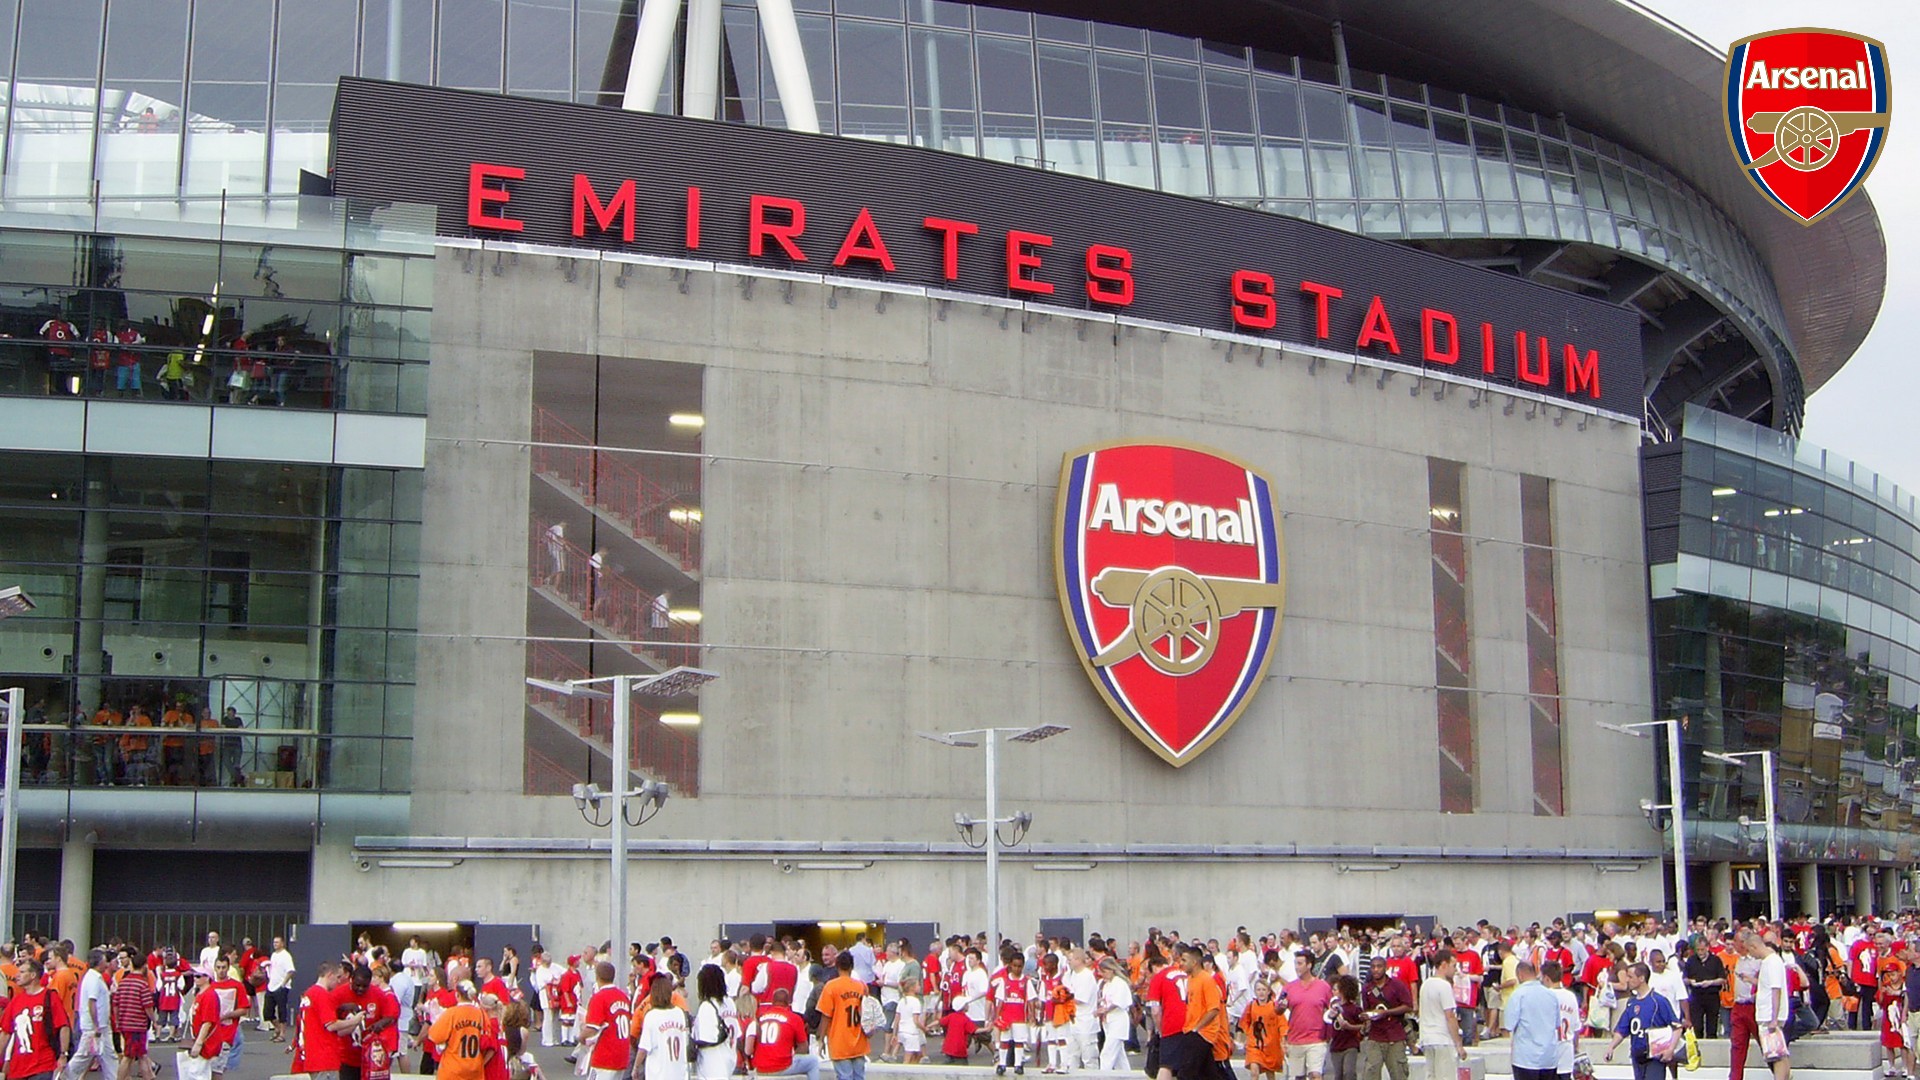 Wallpapers HD Arsenal Stadium With Resolution 1920X1080 pixel. You can make this wallpaper for your Mac or Windows Desktop Background, iPhone, Android or Tablet and another Smartphone device for free